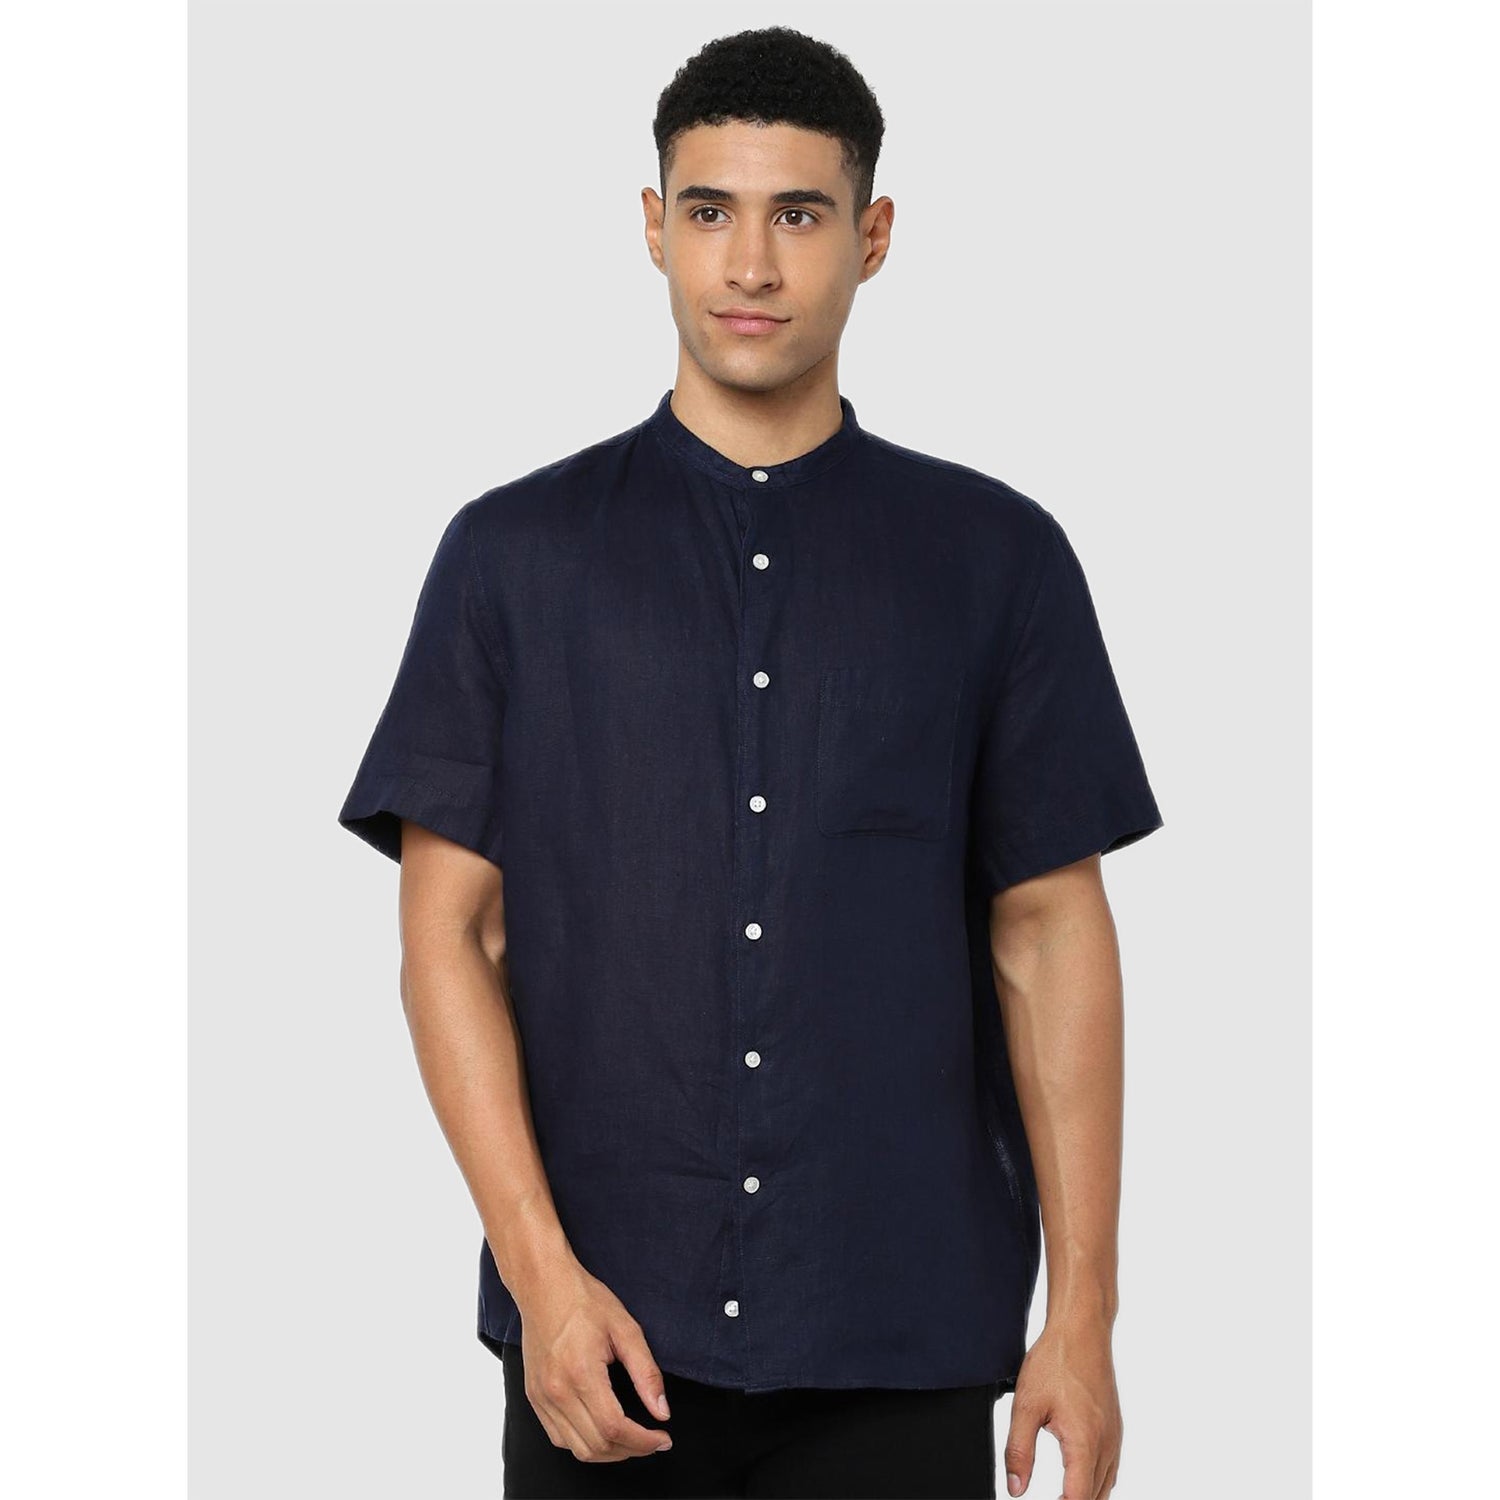 Navy Blue Solid Regular Fit Classic Casual Shirt (BAMAOPOC)